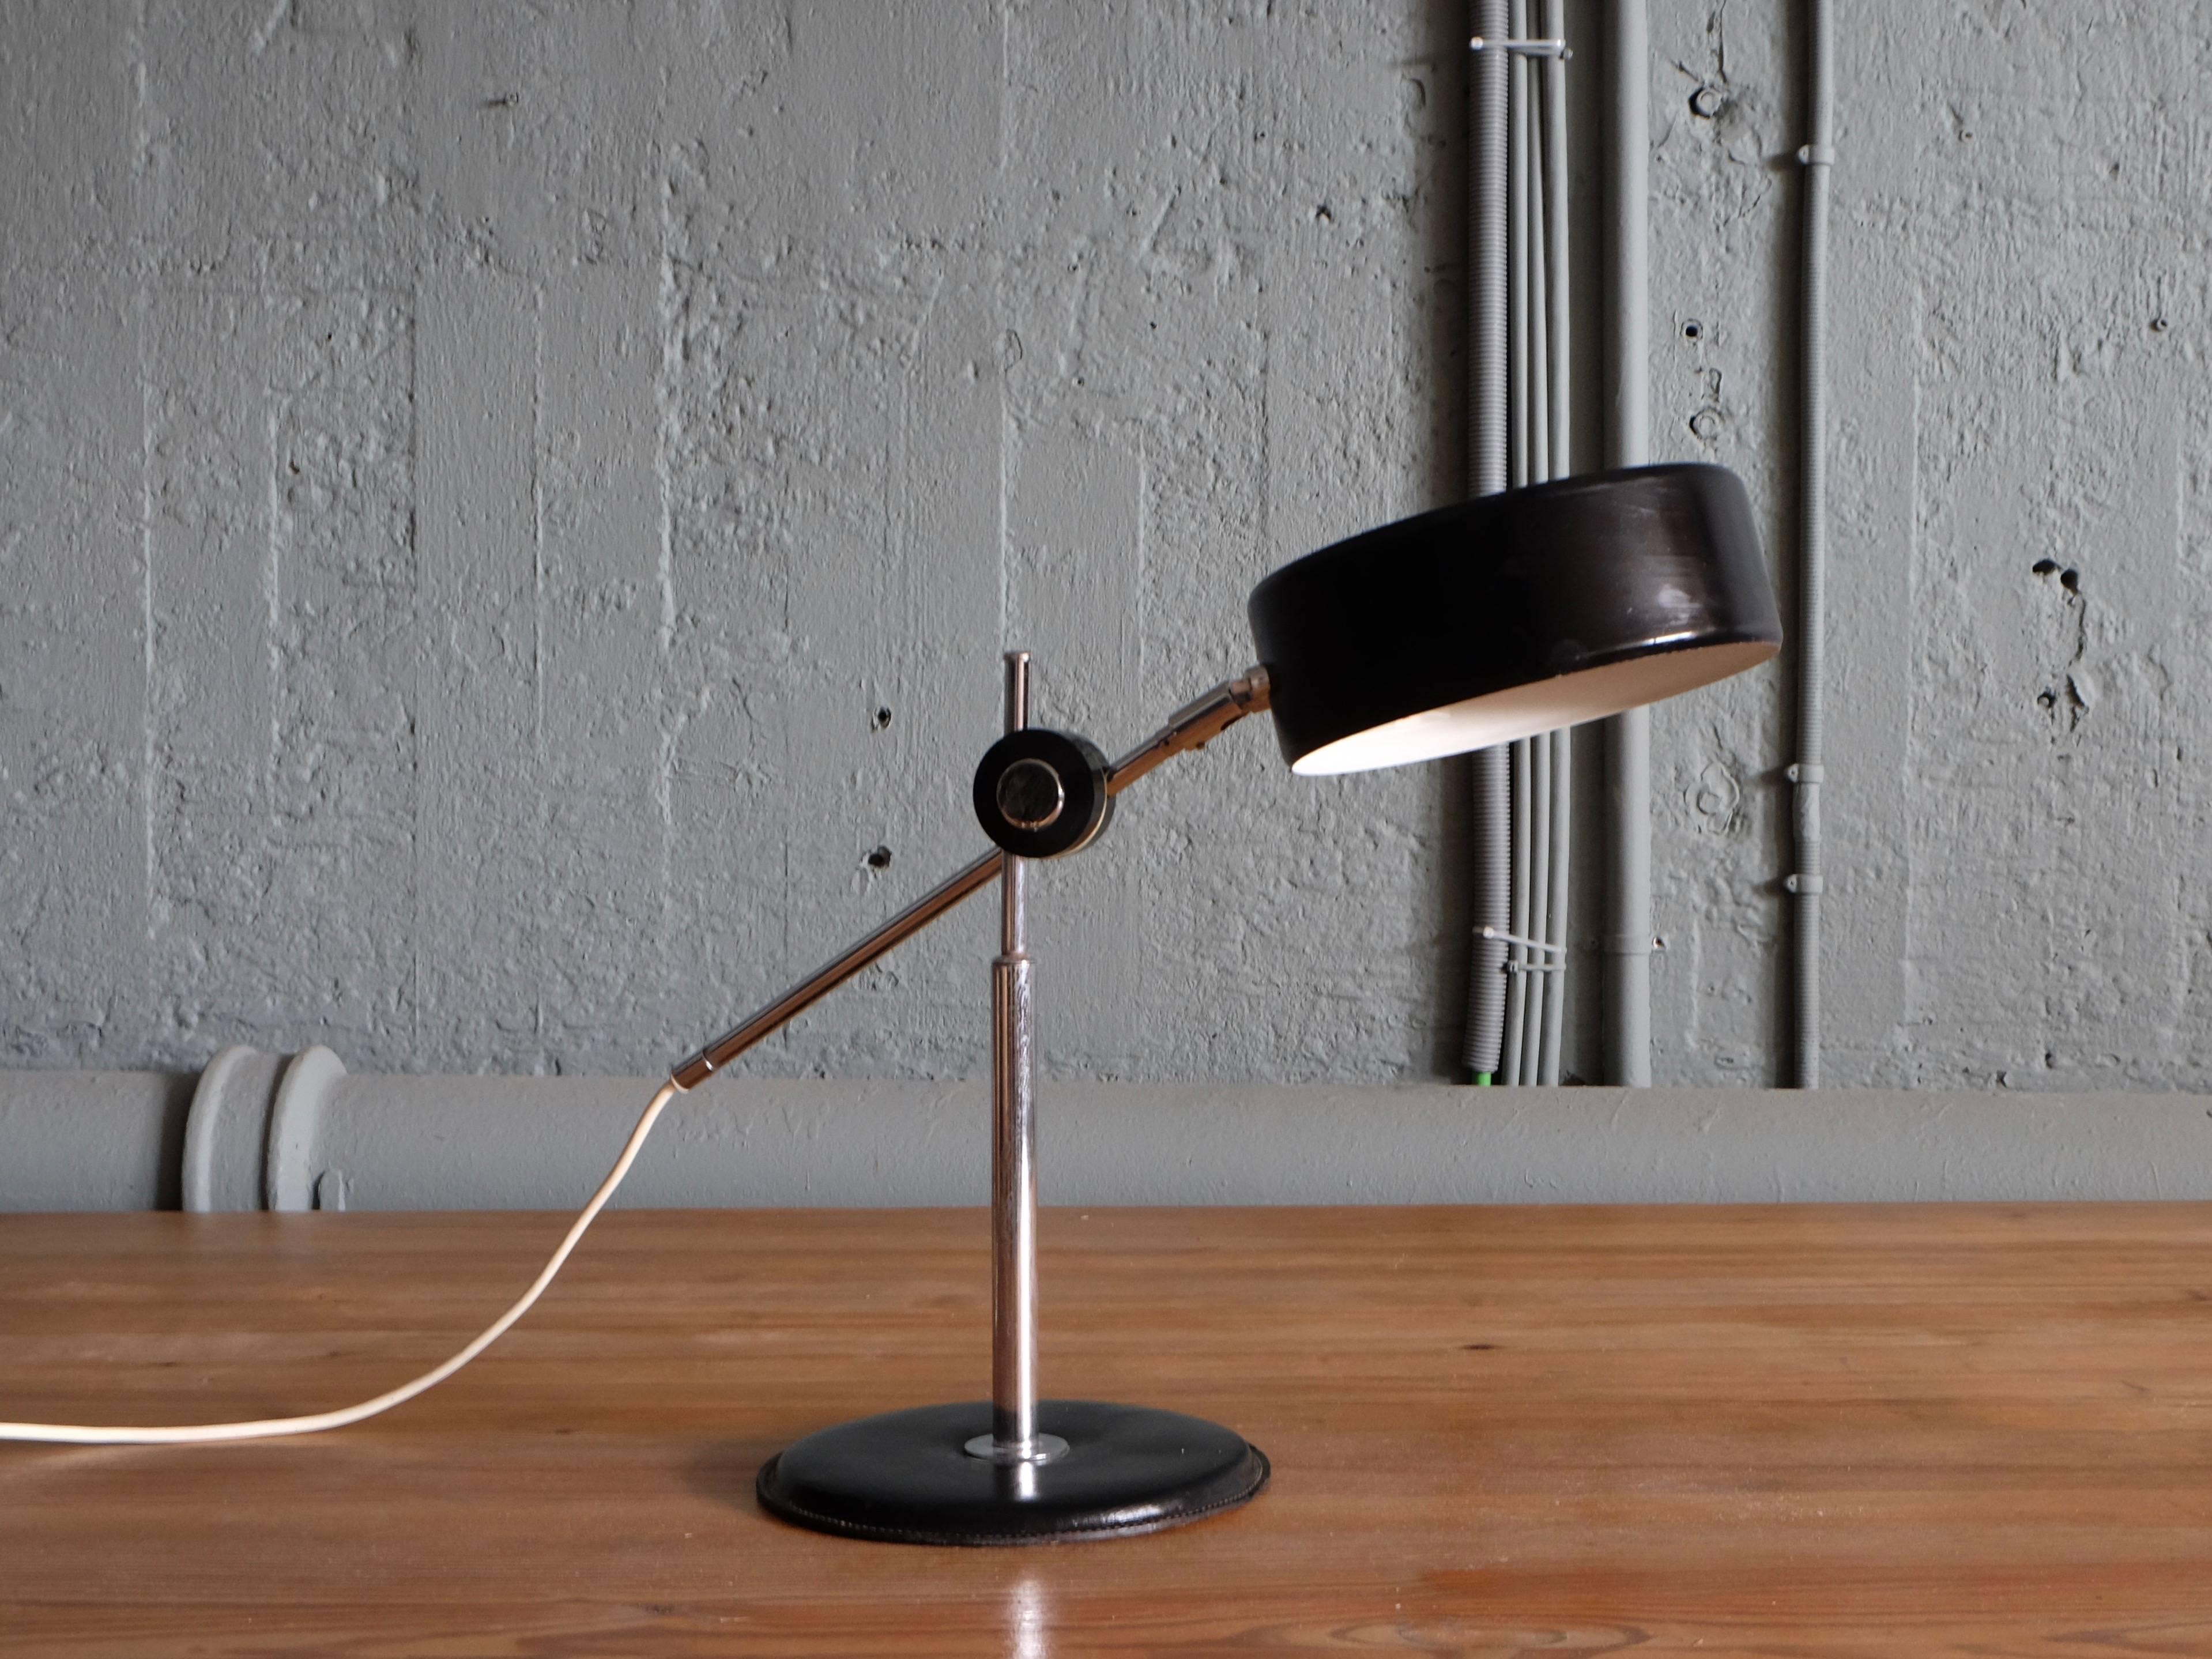 Model Sirius/Olympia. Black leather base.
Produced by Ateljé Lyktan, Sweden, 1960s.
Height is adjustable in all directions.
Global shipping: USD 199.